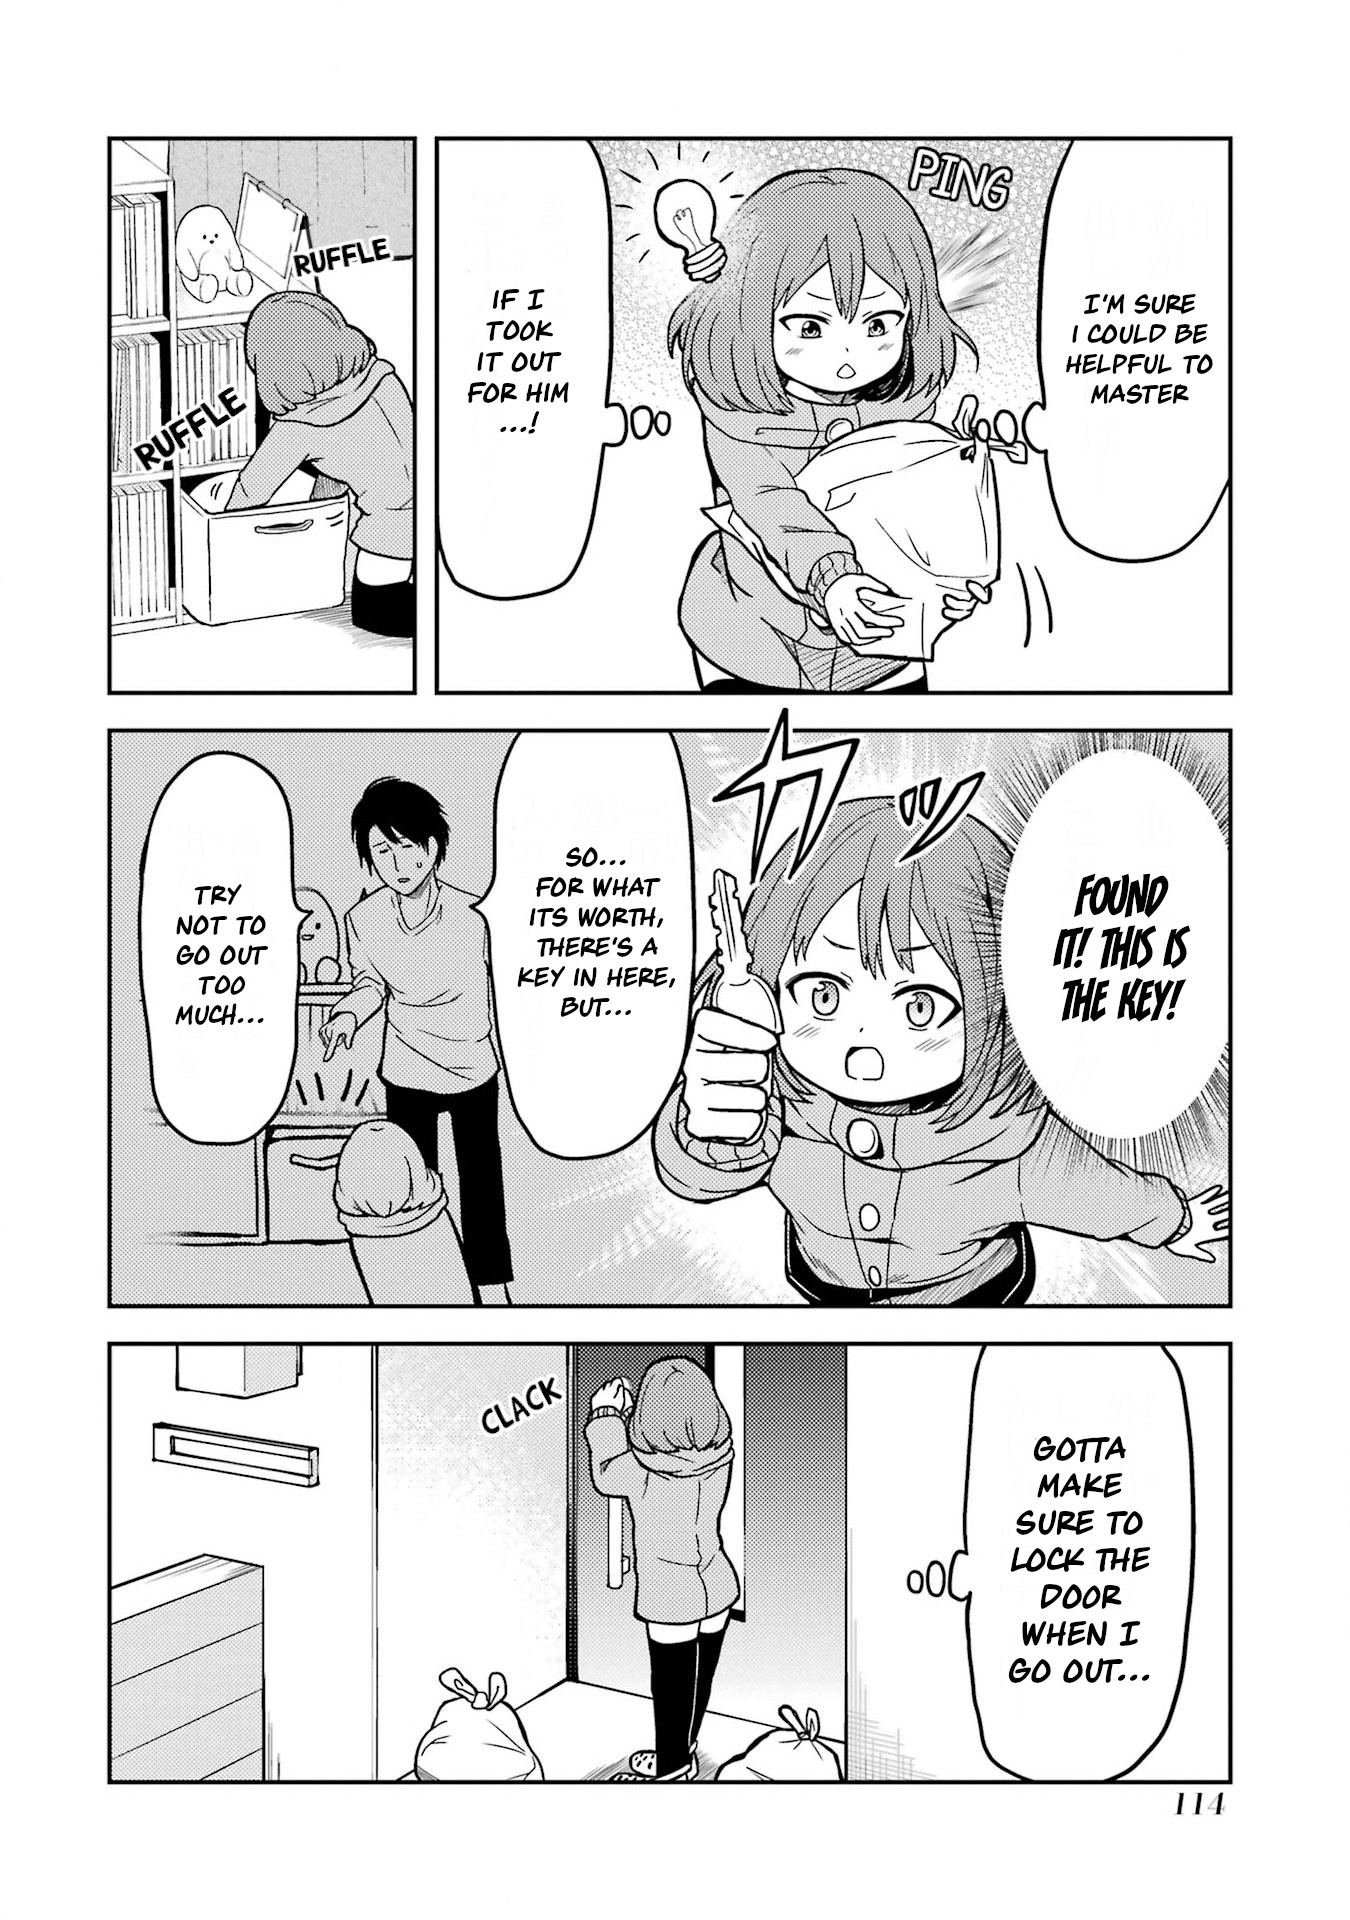 Turns Out My Dick Was A Cute Girl Vol.1 Chapter 9: My Dick And Kanzaki-San 1 - Picture 2